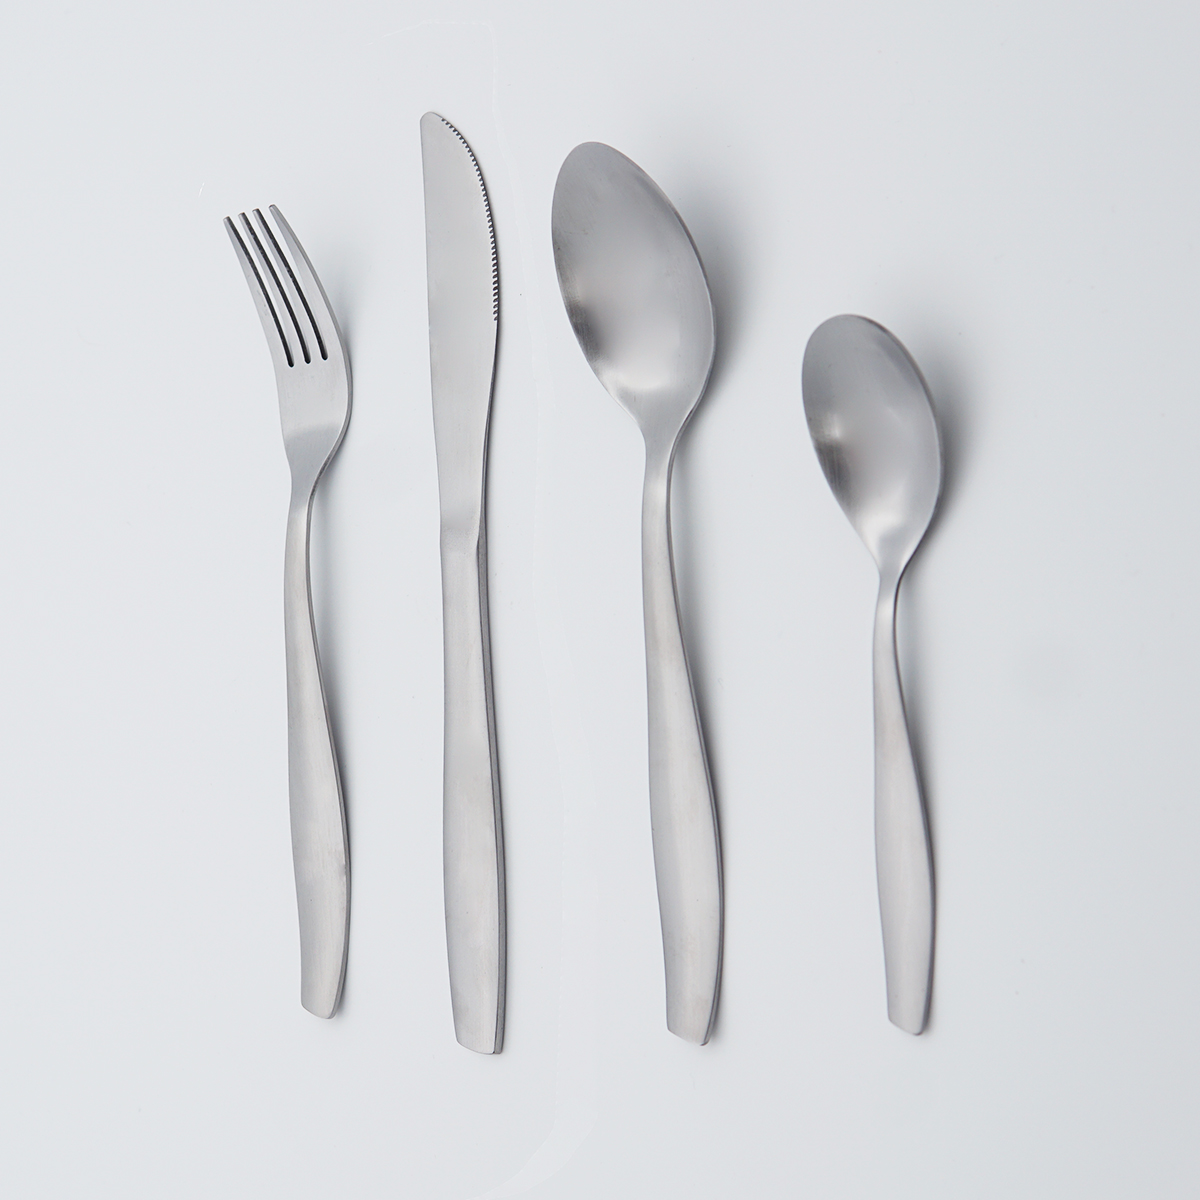 Wholesale Good Quality Cheap silverware flatware Strong and robust cutlery 18/8 stainless steel stainless set